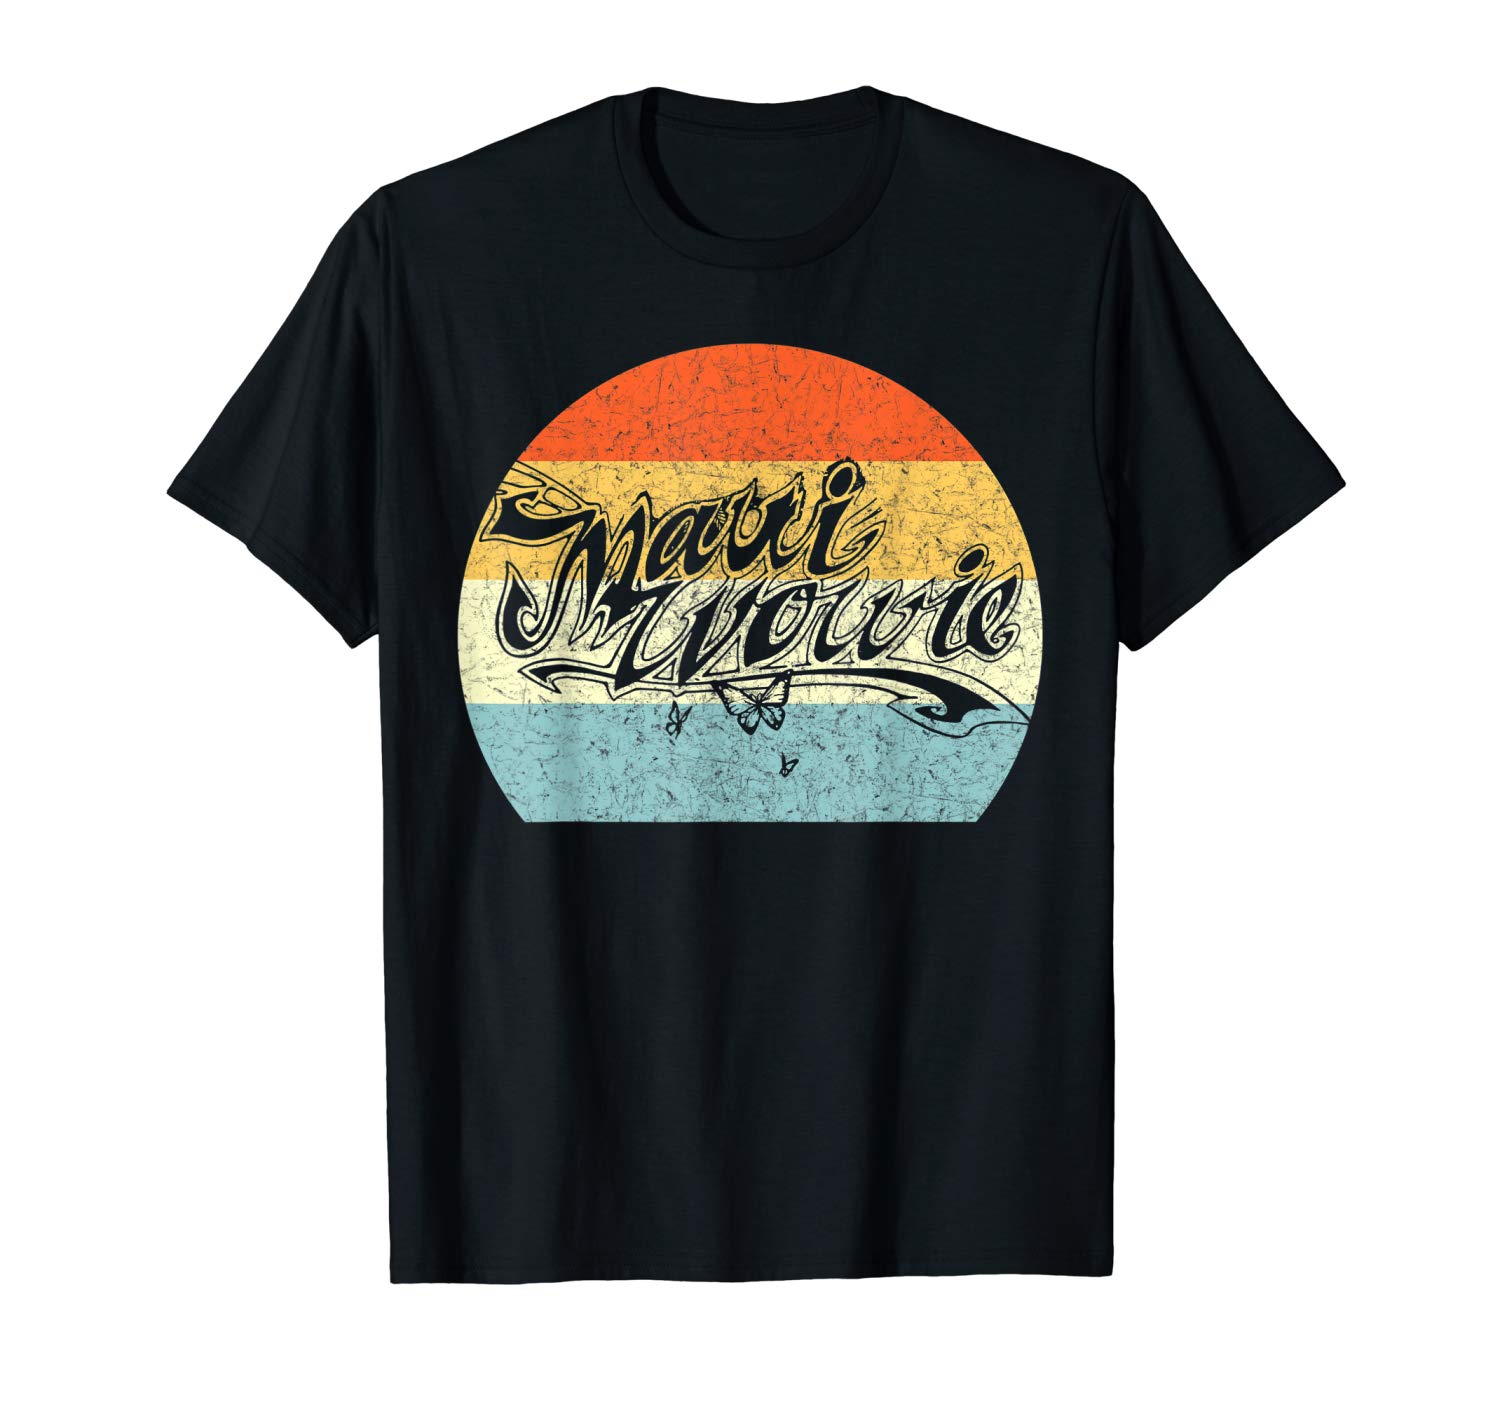 An image of the vintage maui wowie sun design in black from Ganja Outpost.